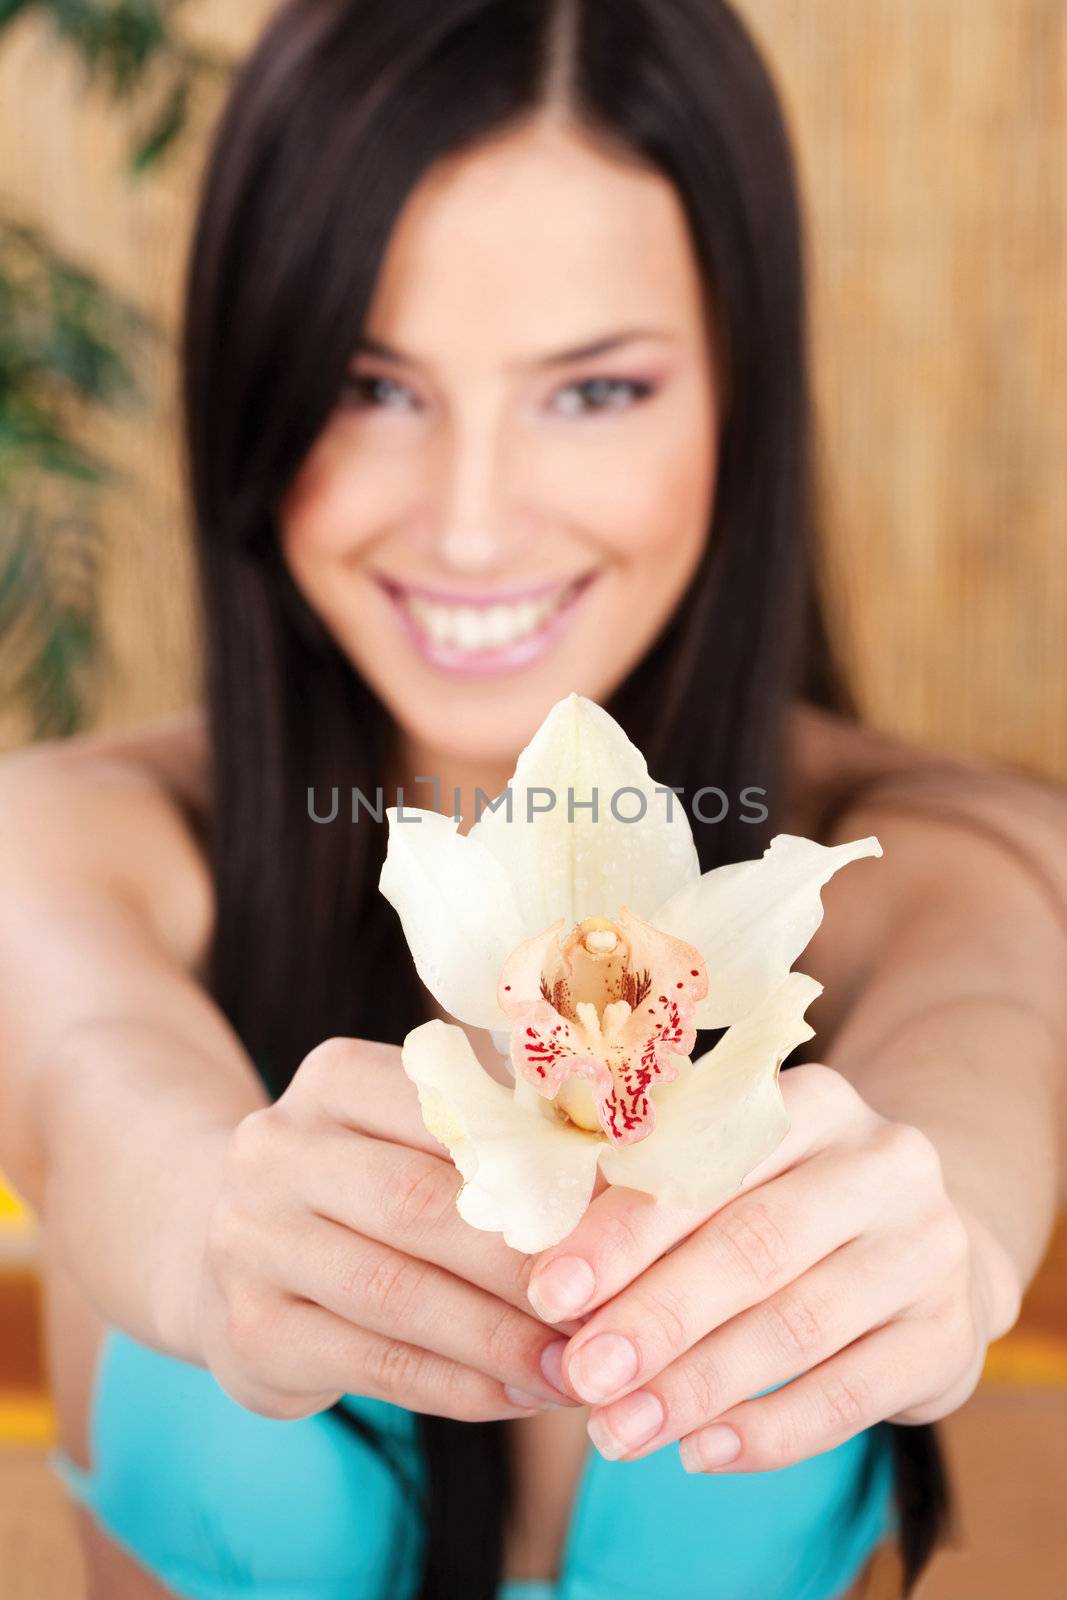 Pretty smiled woman holding white orchid in bikini, focus on flower